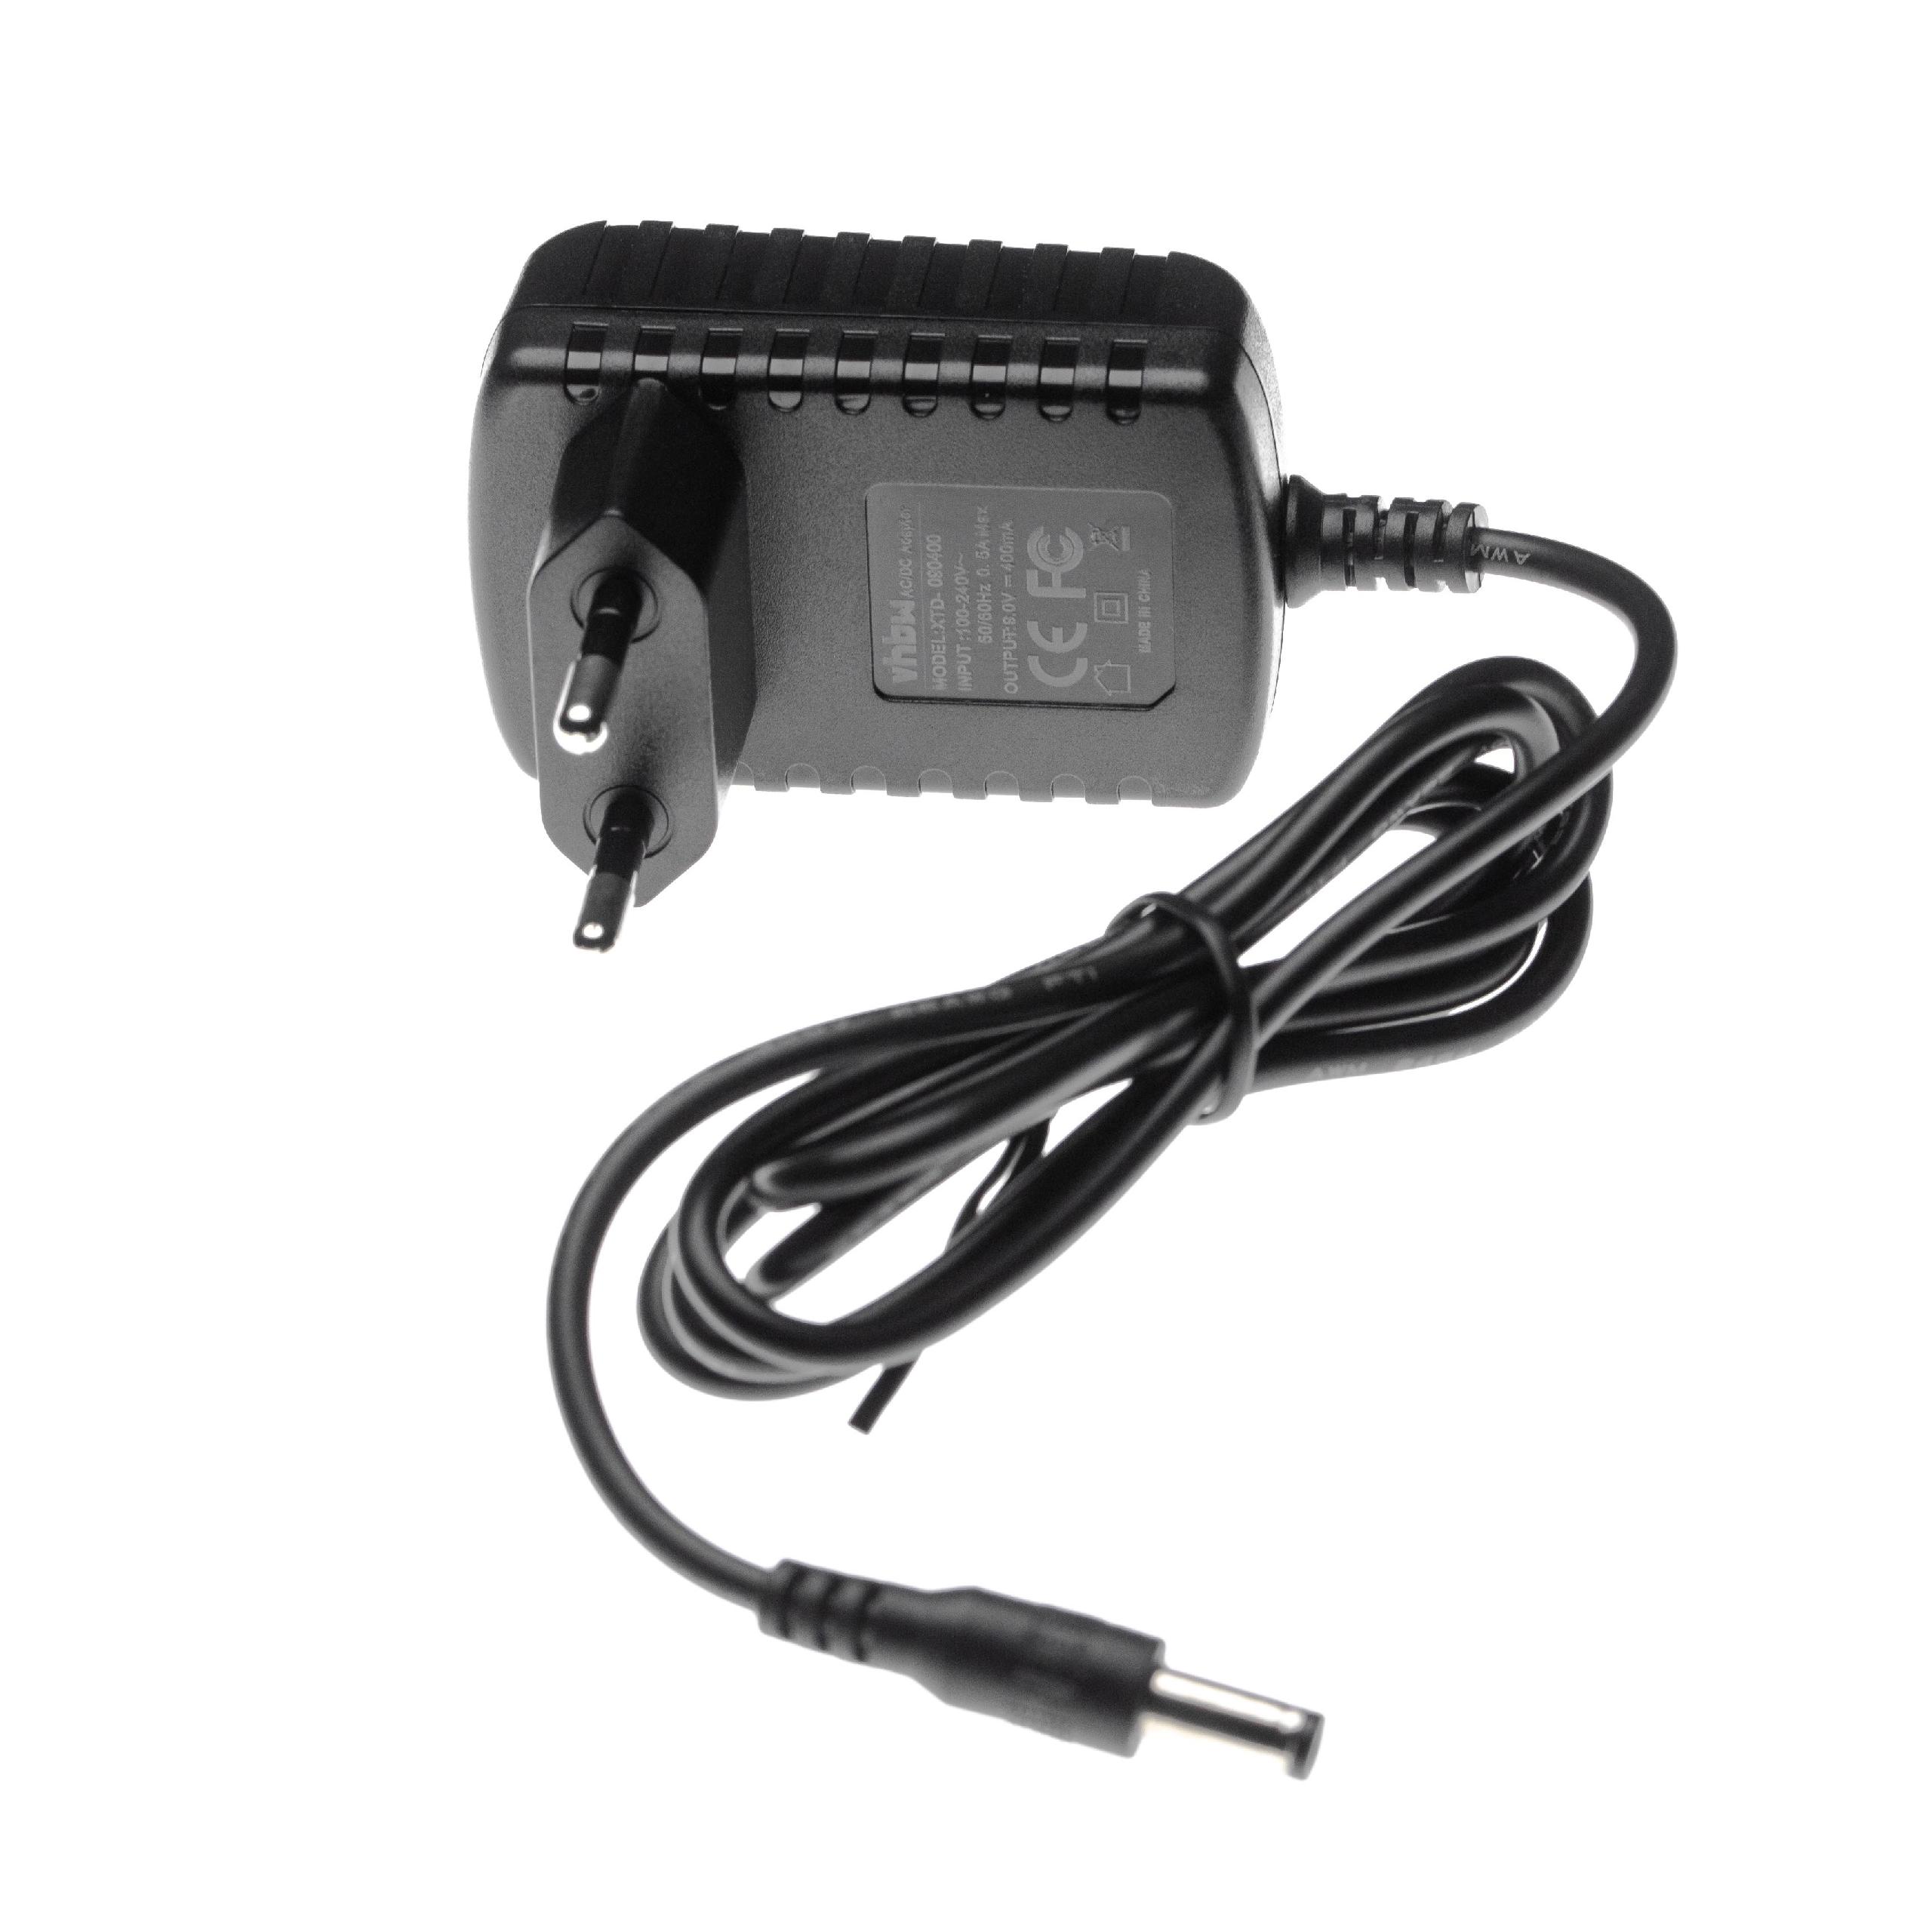 Mains Power Adapter replaces Bosch / Skil 2610395914 for Skil Power Tool - 113 cm